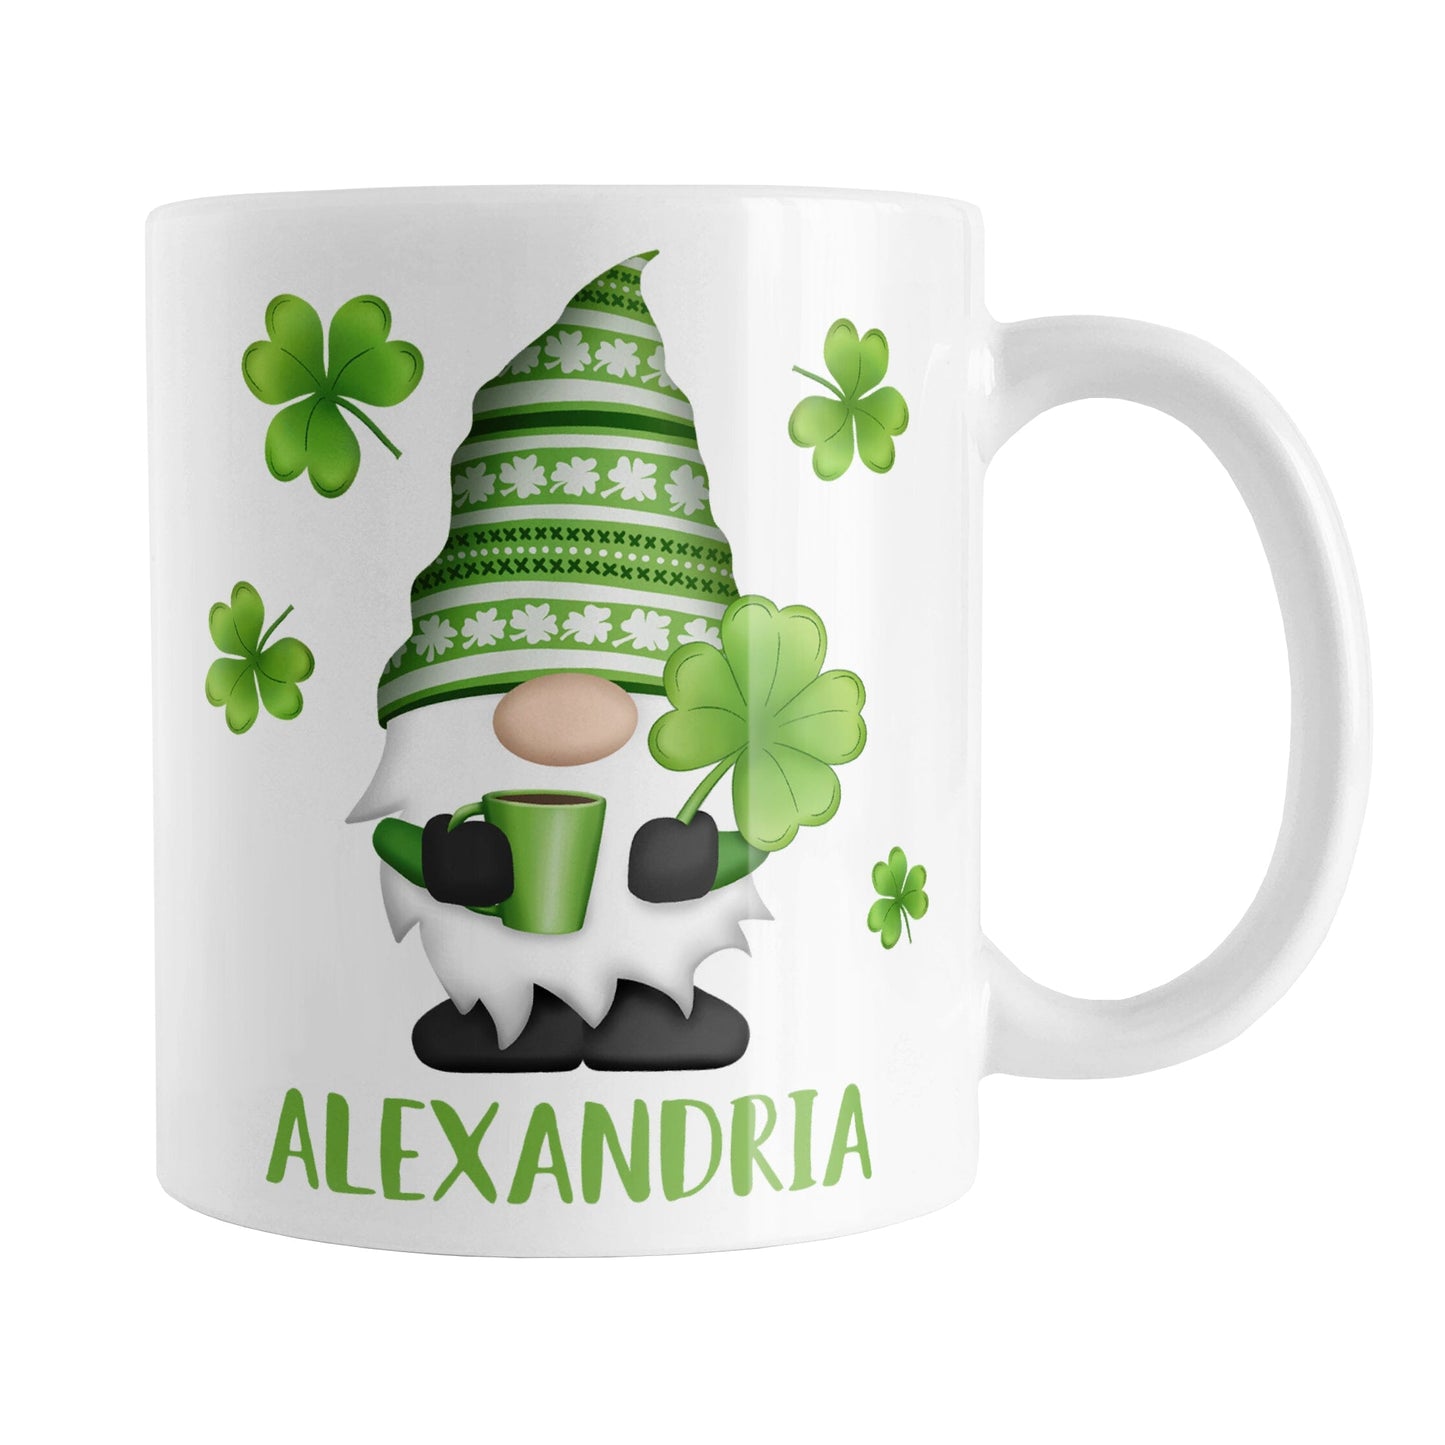 Personalized Lucky Clover Gnome Mug (11oz) at Amy's Coffee Mugs. A ceramic coffee mug designed with a gnome with a festive green clover pattern hat, holding a hot beverage and large 4-leaf clover, with shamrocks around the gnome. A personalized name is printed below the gnome in green, making it the perfect gift. This cute lucky clover gnome illustration and personalization are on both sides of the mug. 